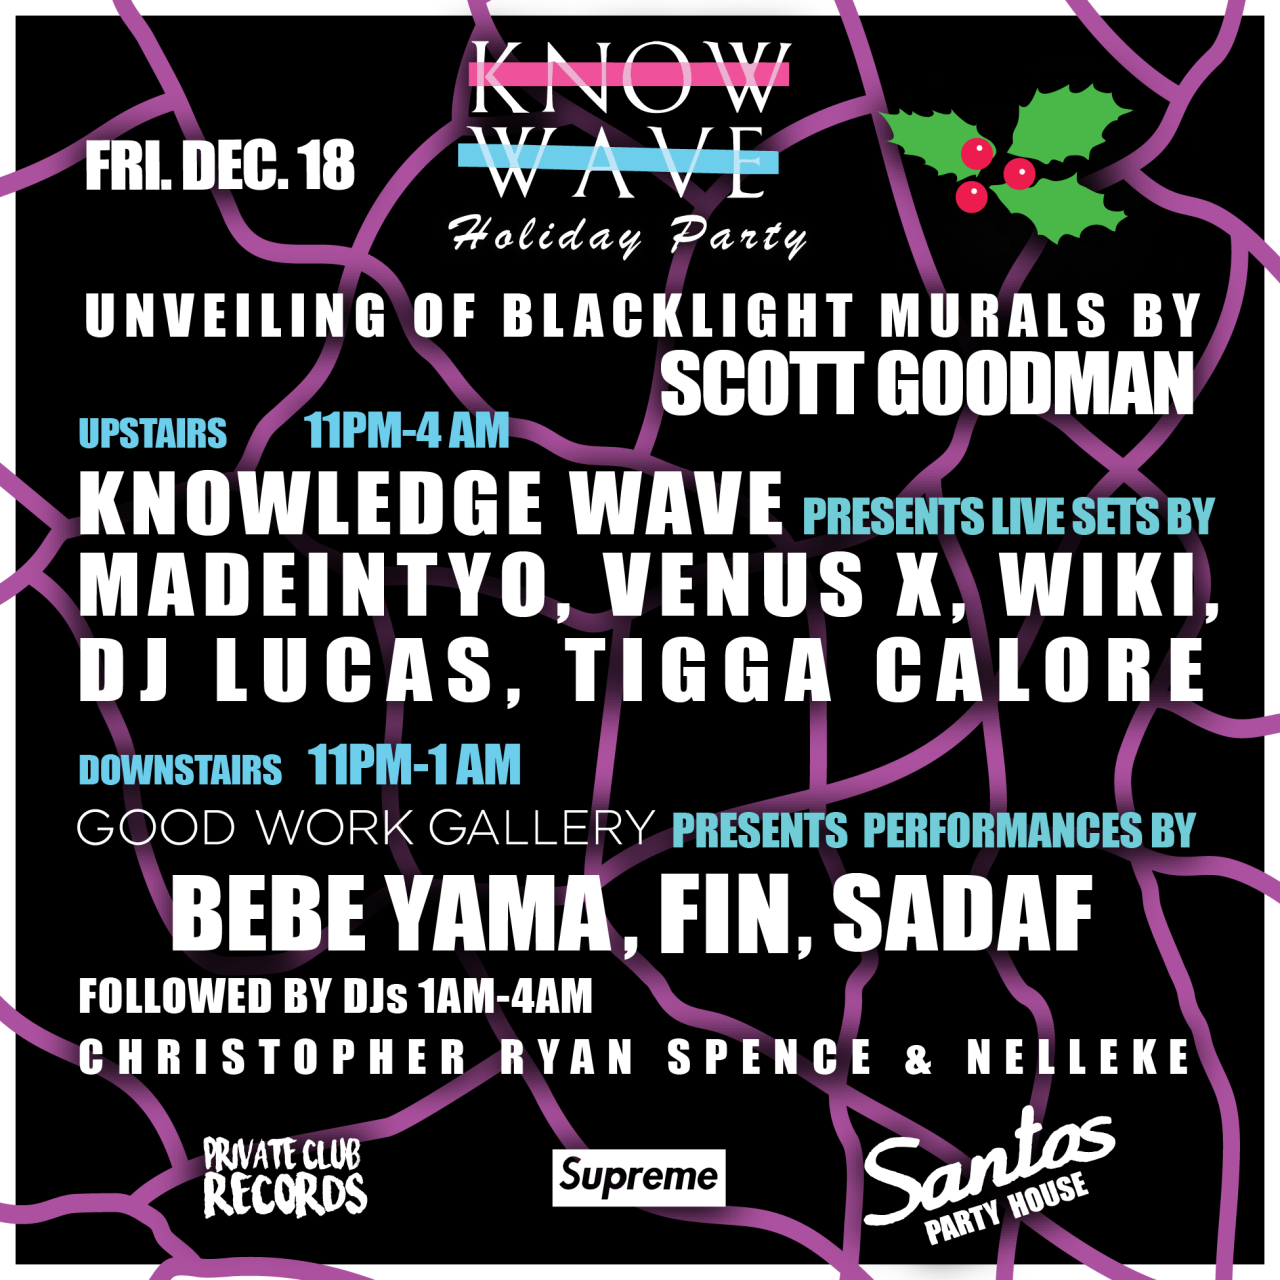 Good Work Gallery invites you to the unveiling of new wall pieces by Scott Goodman in conjunction with The Moran Bondaroff Holiday Party and Knowledge Wave at Santos Party House. The evening will feature performances curated by Sara Blazej in which...